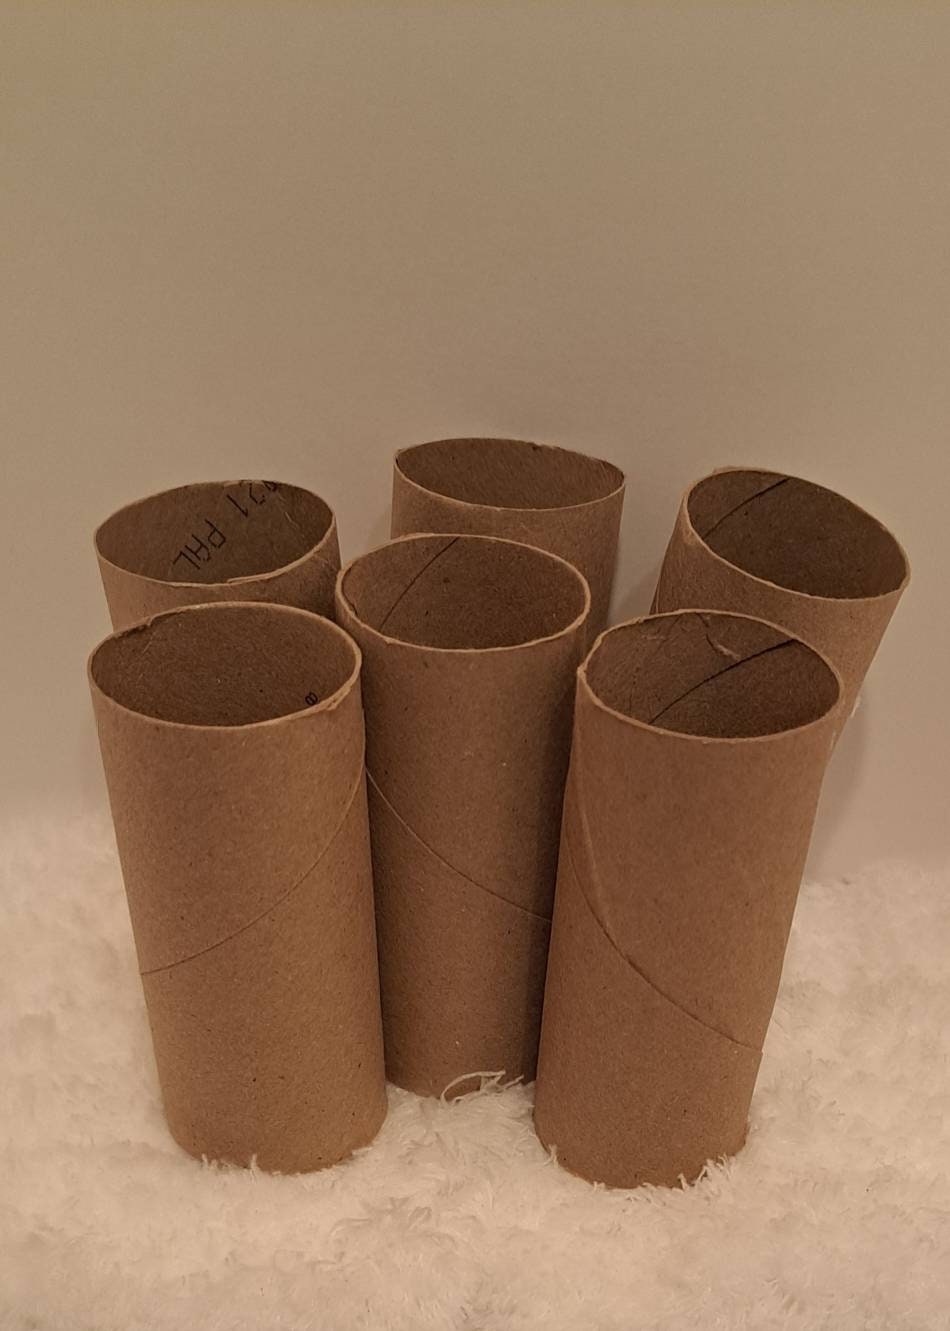 LOT OF 100+ CLEAN EMPTY TOILET PAPER ROLLS, CARDBOARD TUBES FOR